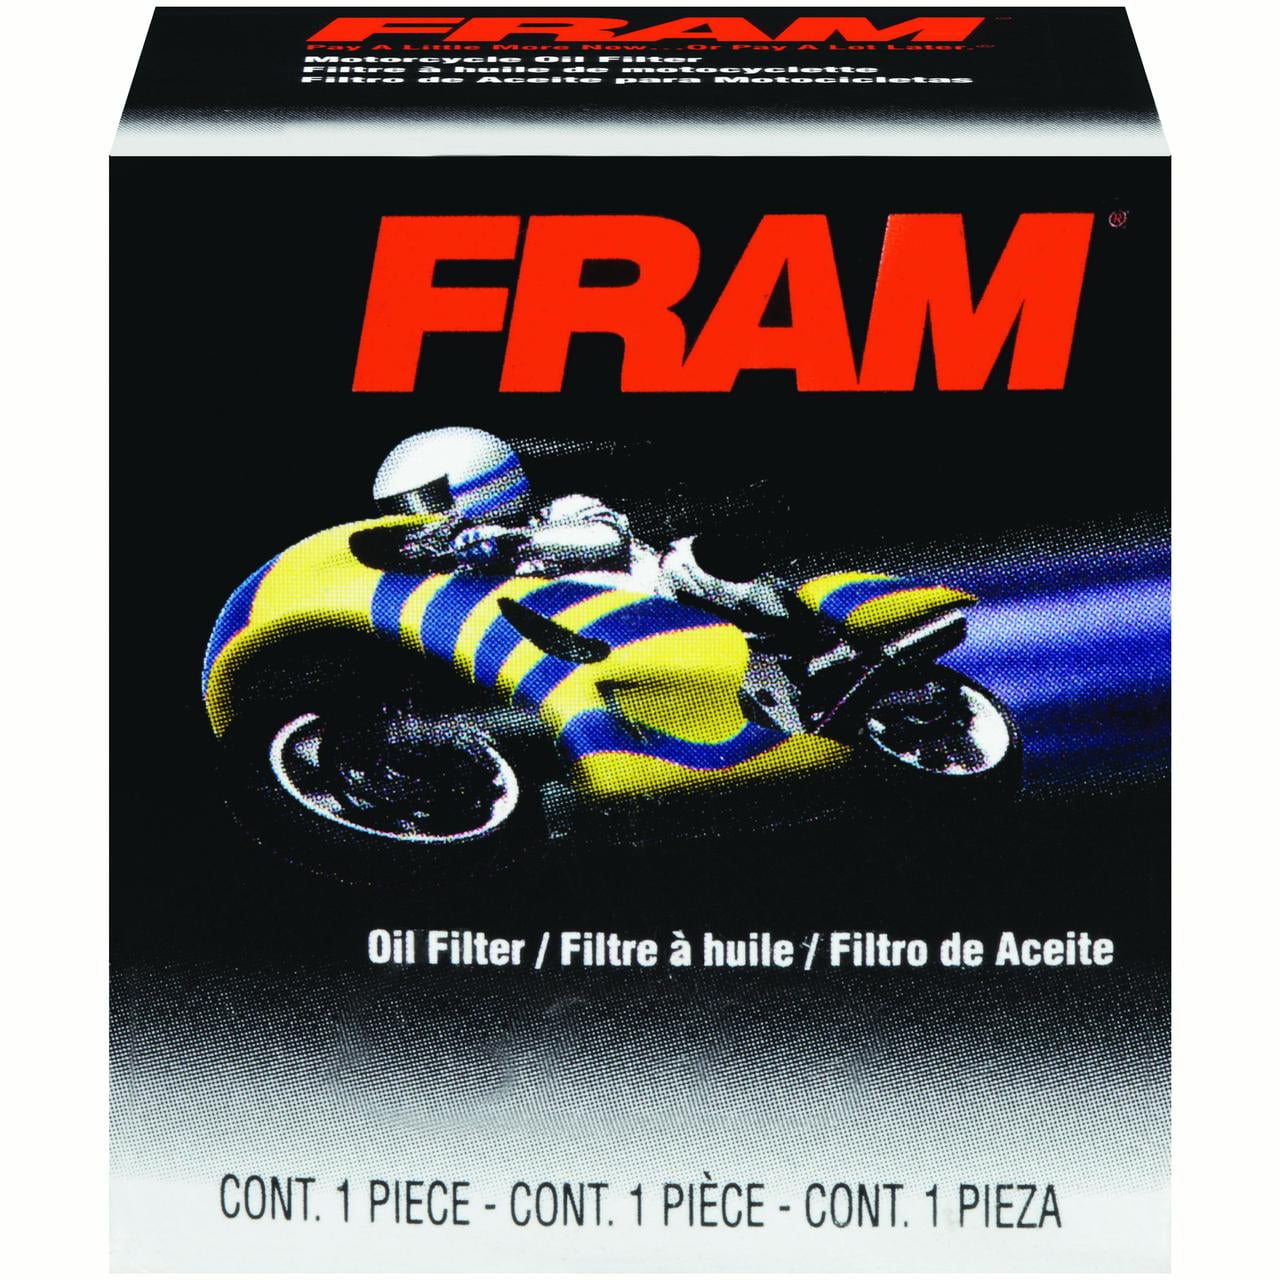 NEW lot of 2 qty Fram Motorcycle Oil Filter CH6015 FREE SHIPPING